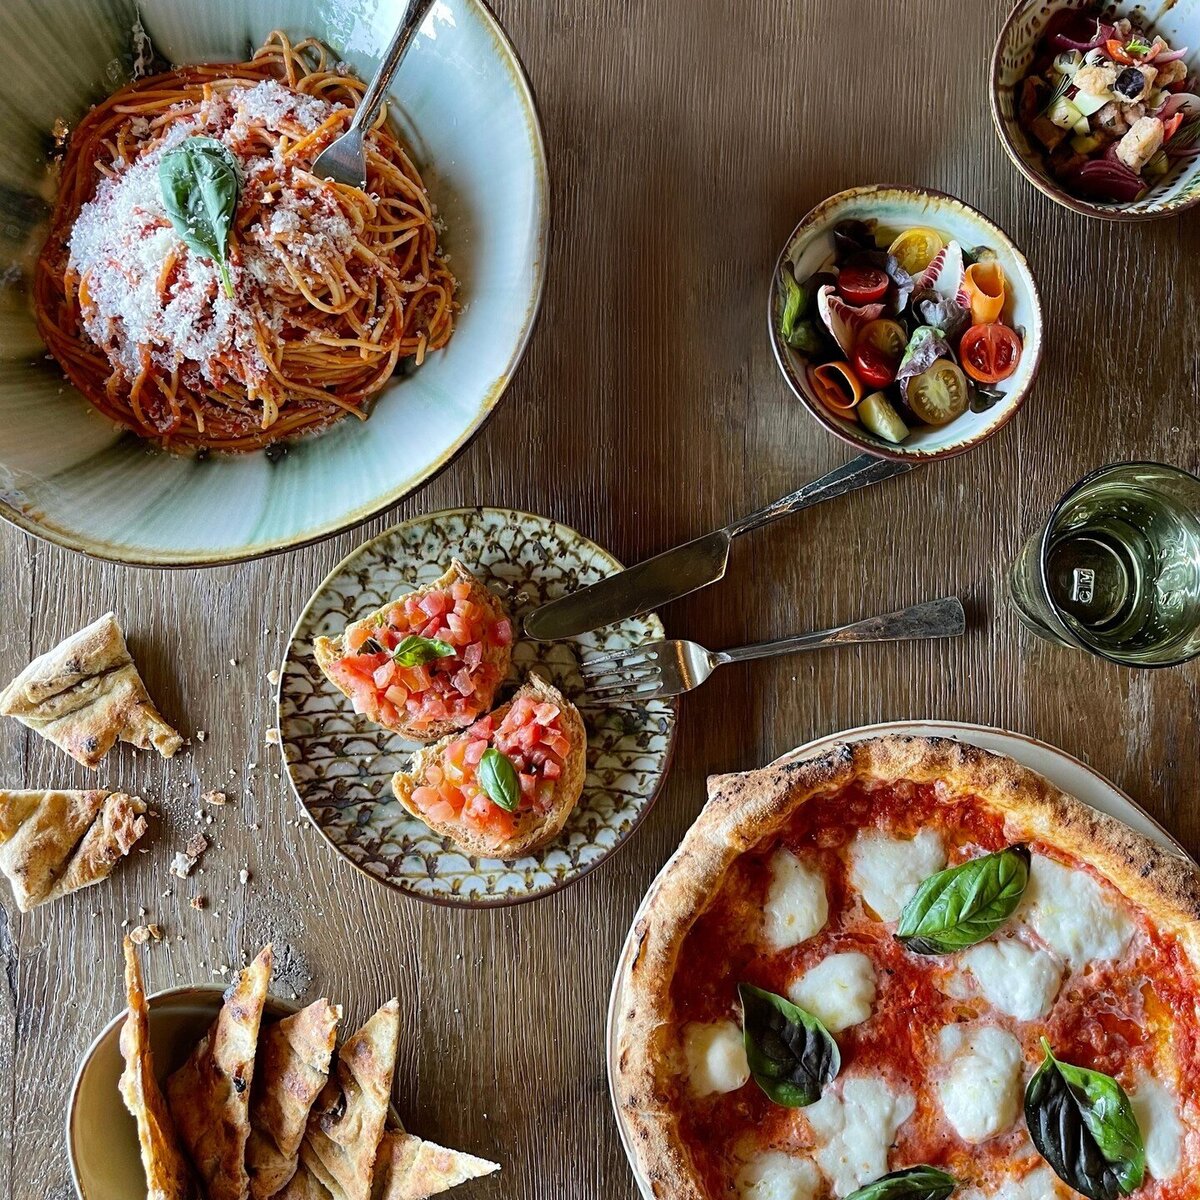 An overhead view of the margherita pizza and spaghetti pomodoro at the rustic chic restaurant within Borgo Santo Pietro